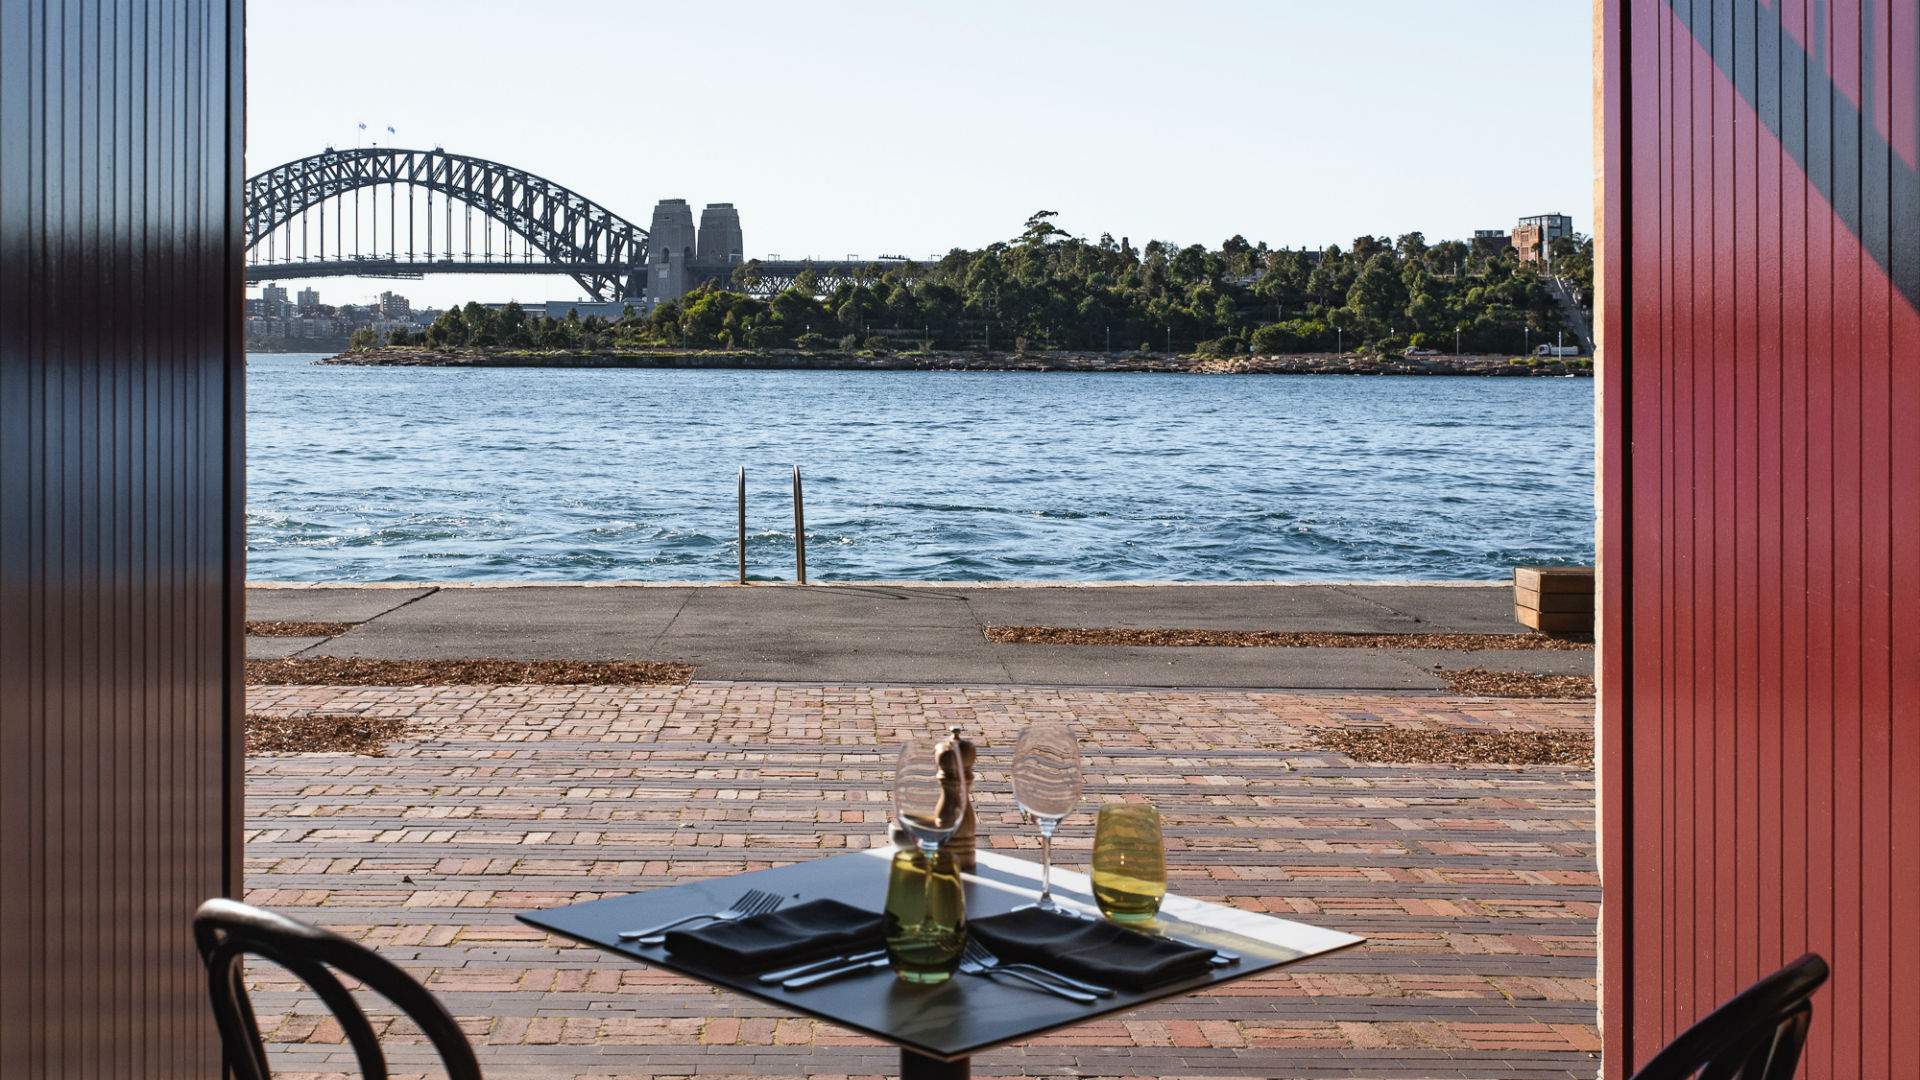 Balmain's Historic Fenwick Building Has Reopened as a Harbourside Cafe and Gallery Space